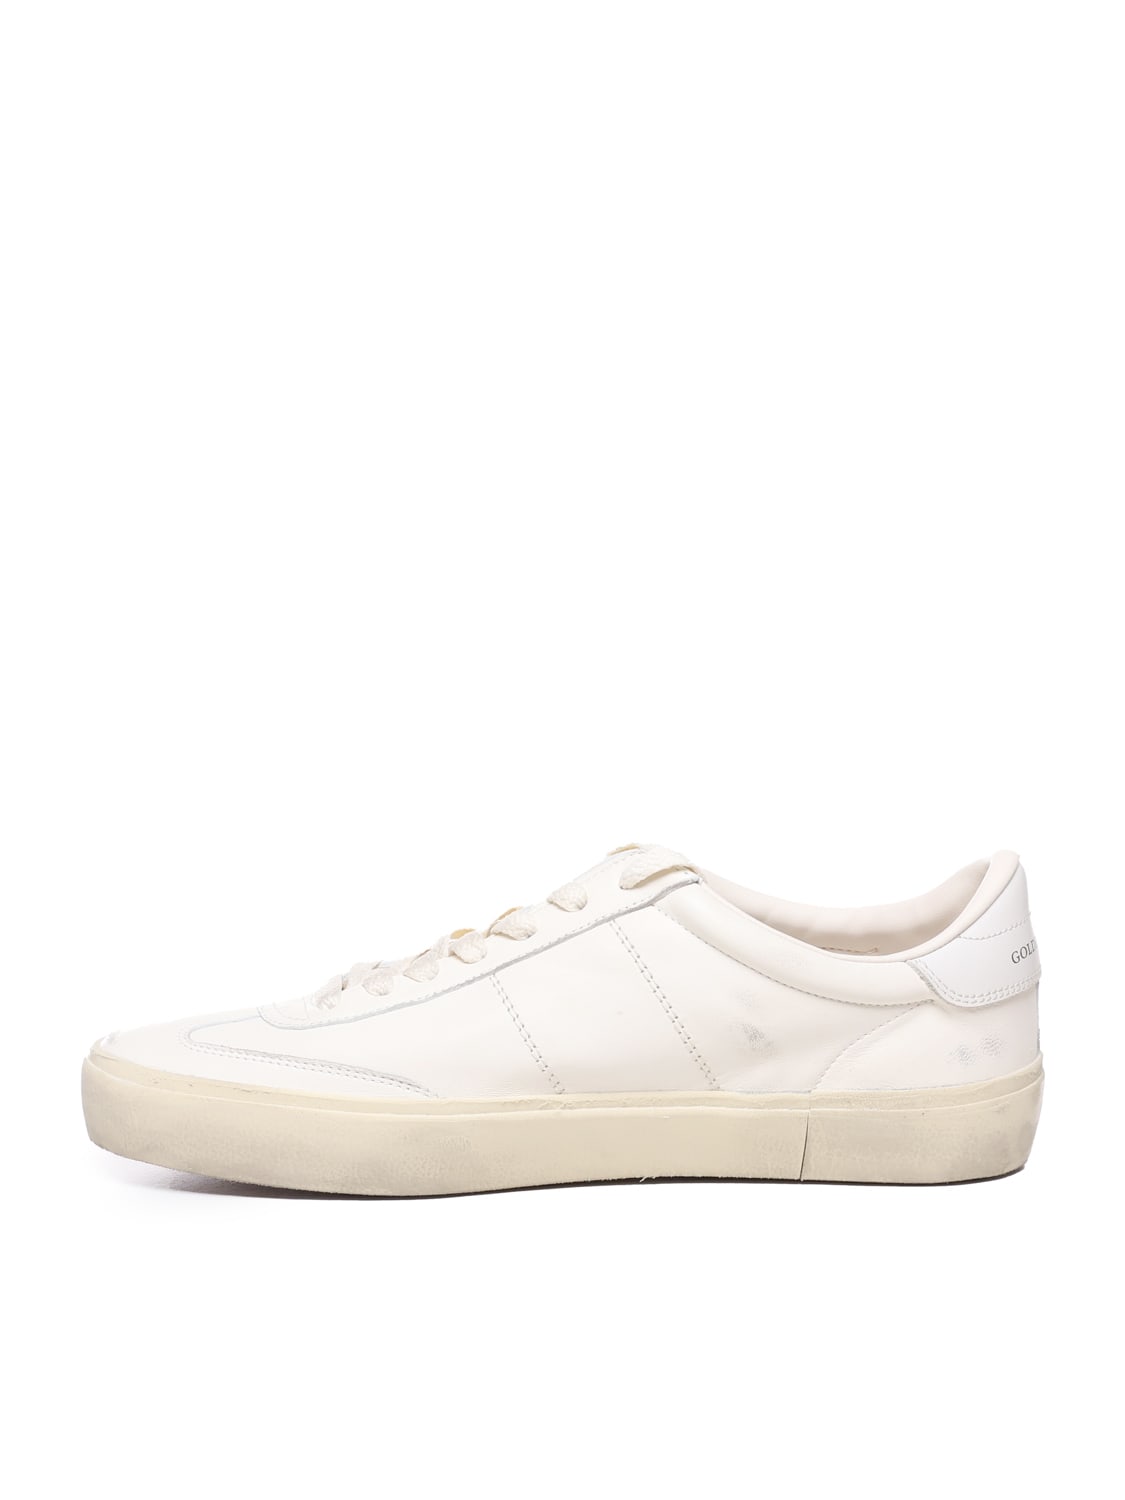 Shop Golden Goose Soul Star Sneakers In White